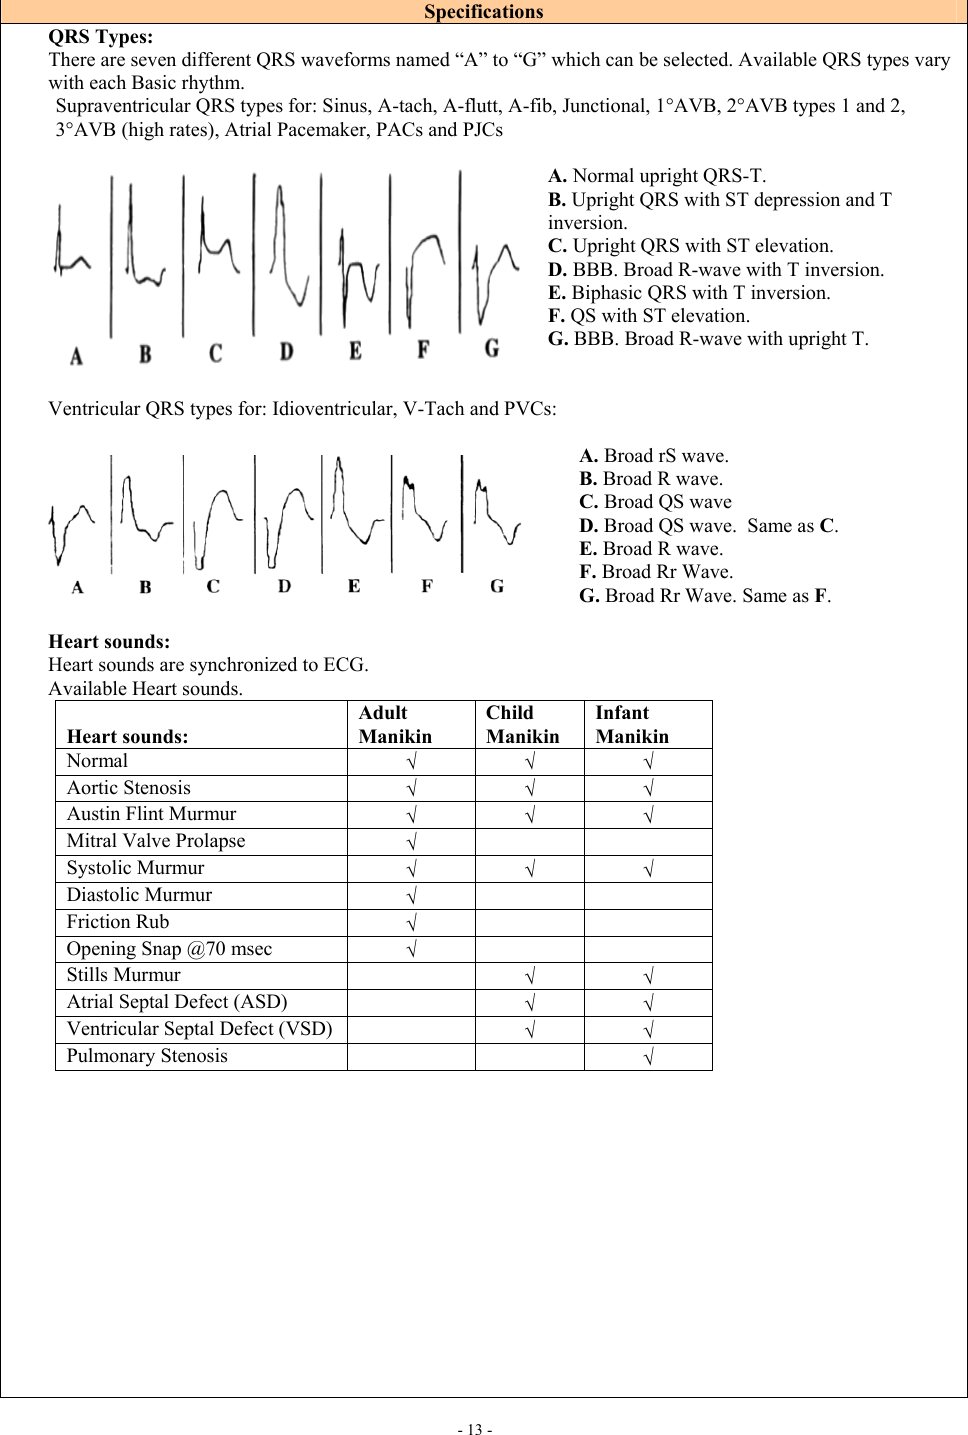     - 13 - Specifications QRS Types: There are seven different QRS waveforms named “A” to “G” which can be selected. Available QRS types vary with each Basic rhythm. Supraventricular QRS types for: Sinus, A-tach, A-flutt, A-fib, Junctional, 1°AVB, 2°AVB types 1 and 2, 3°AVB (high rates), Atrial Pacemaker, PACs and PJCs  A. Normal upright QRS-T. B. Upright QRS with ST depression and T inversion. C. Upright QRS with ST elevation. D. BBB. Broad R-wave with T inversion. E. Biphasic QRS with T inversion.  F. QS with ST elevation. G. BBB. Broad R-wave with upright T.   Ventricular QRS types for: Idioventricular, V-Tach and PVCs:  A. Broad rS wave. B. Broad R wave. C. Broad QS wave D. Broad QS wave.  Same as C. E. Broad R wave.  F. Broad Rr Wave. G. Broad Rr Wave. Same as F.  Heart sounds: Heart sounds are synchronized to ECG. Available Heart sounds.   Heart sounds: Adult Manikin Child Manikin  Infant Manikin  Normal  √ √ √ Aortic Stenosis  √ √ √ Austin Flint Murmur  √ √ √ Mitral Valve Prolapse  √     Systolic Murmur   √ √ √ Diastolic Murmur  √     Friction Rub  √     Opening Snap @70 msec  √     Stills Murmur   √ √ Atrial Septal Defect (ASD)   √ √ Ventricular Septal Defect (VSD)   √ √ Pulmonary Stenosis      √               